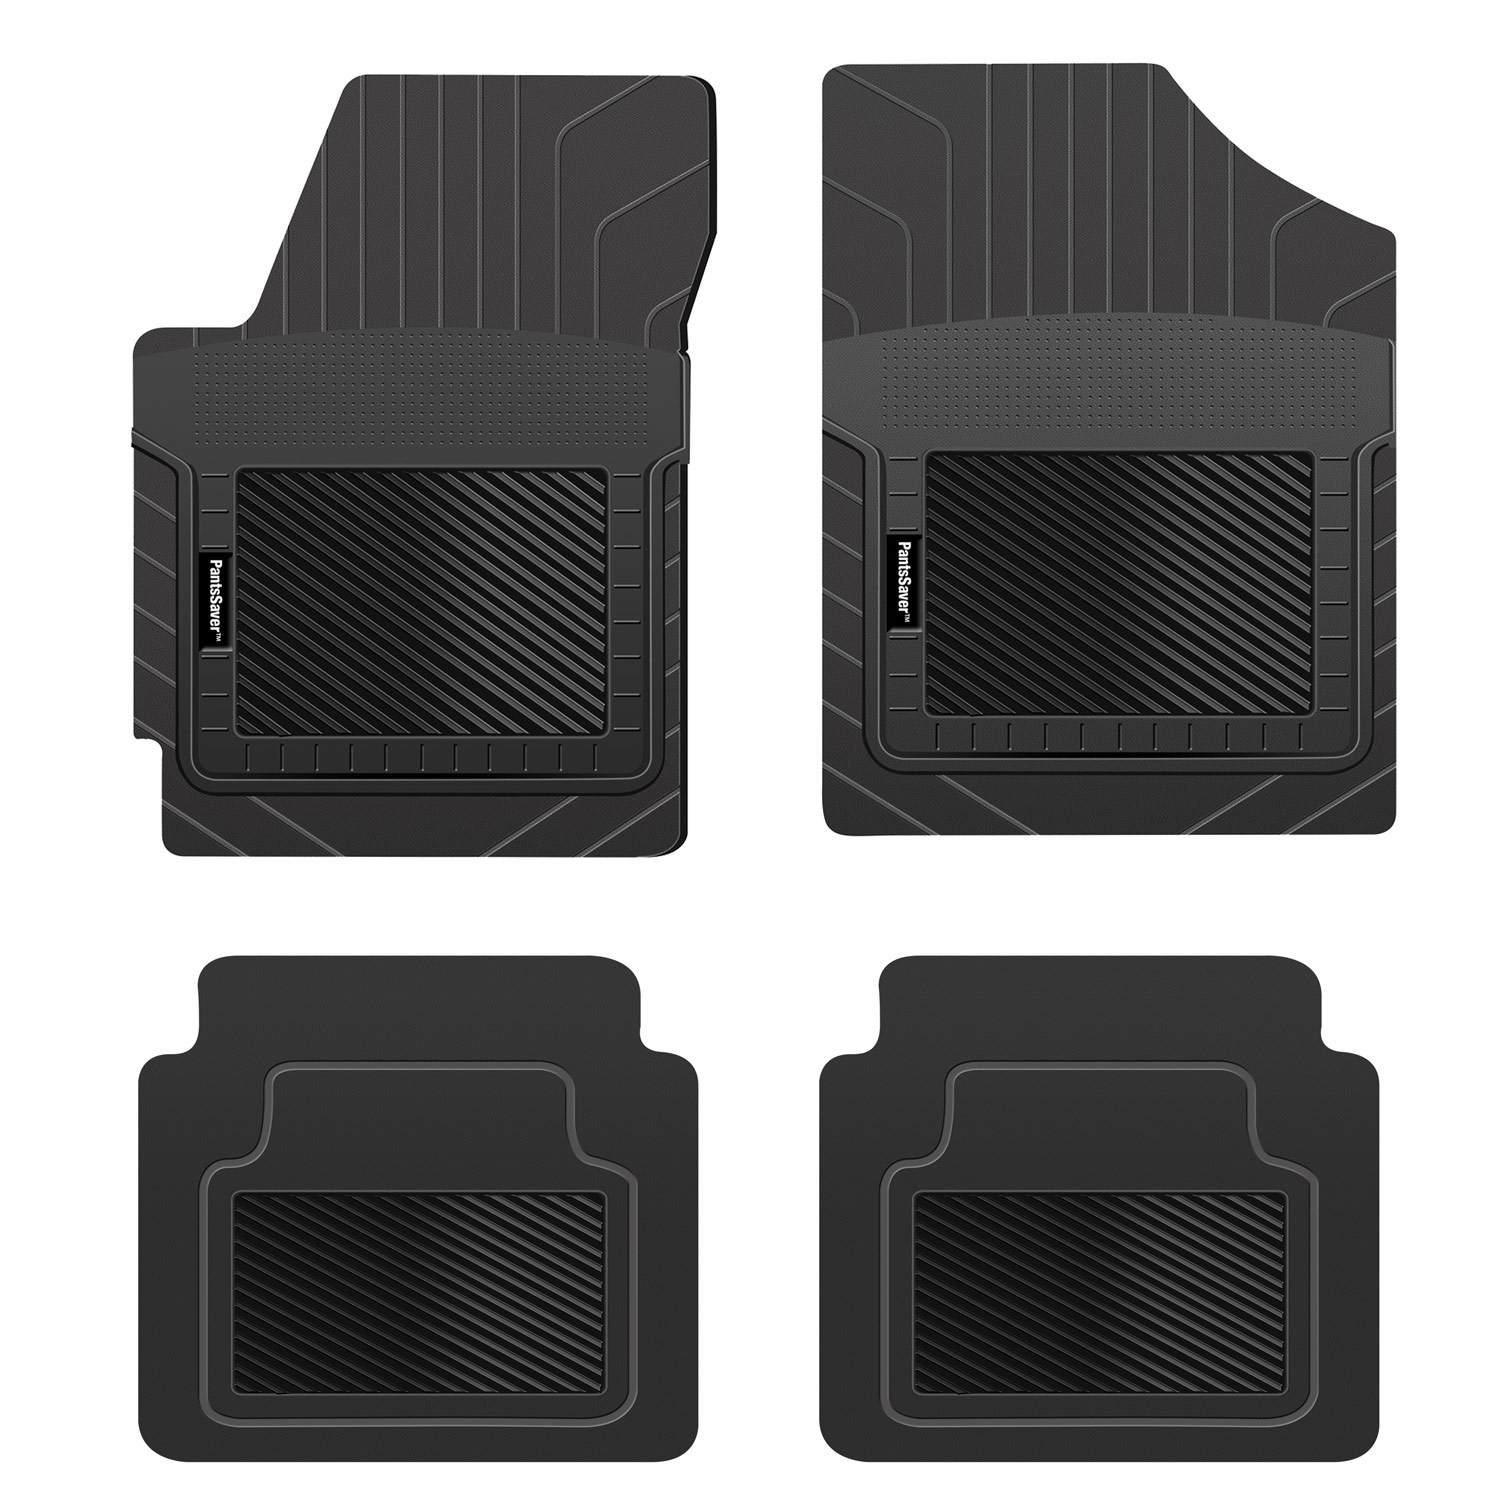 PantsSaver Custom Fit Car Floor Mats for Jeep Compass 2008, 4 pc, All Weather Protection for vehicles, Heavy Duty Weather resistant plastic,Black - image 1 of 8